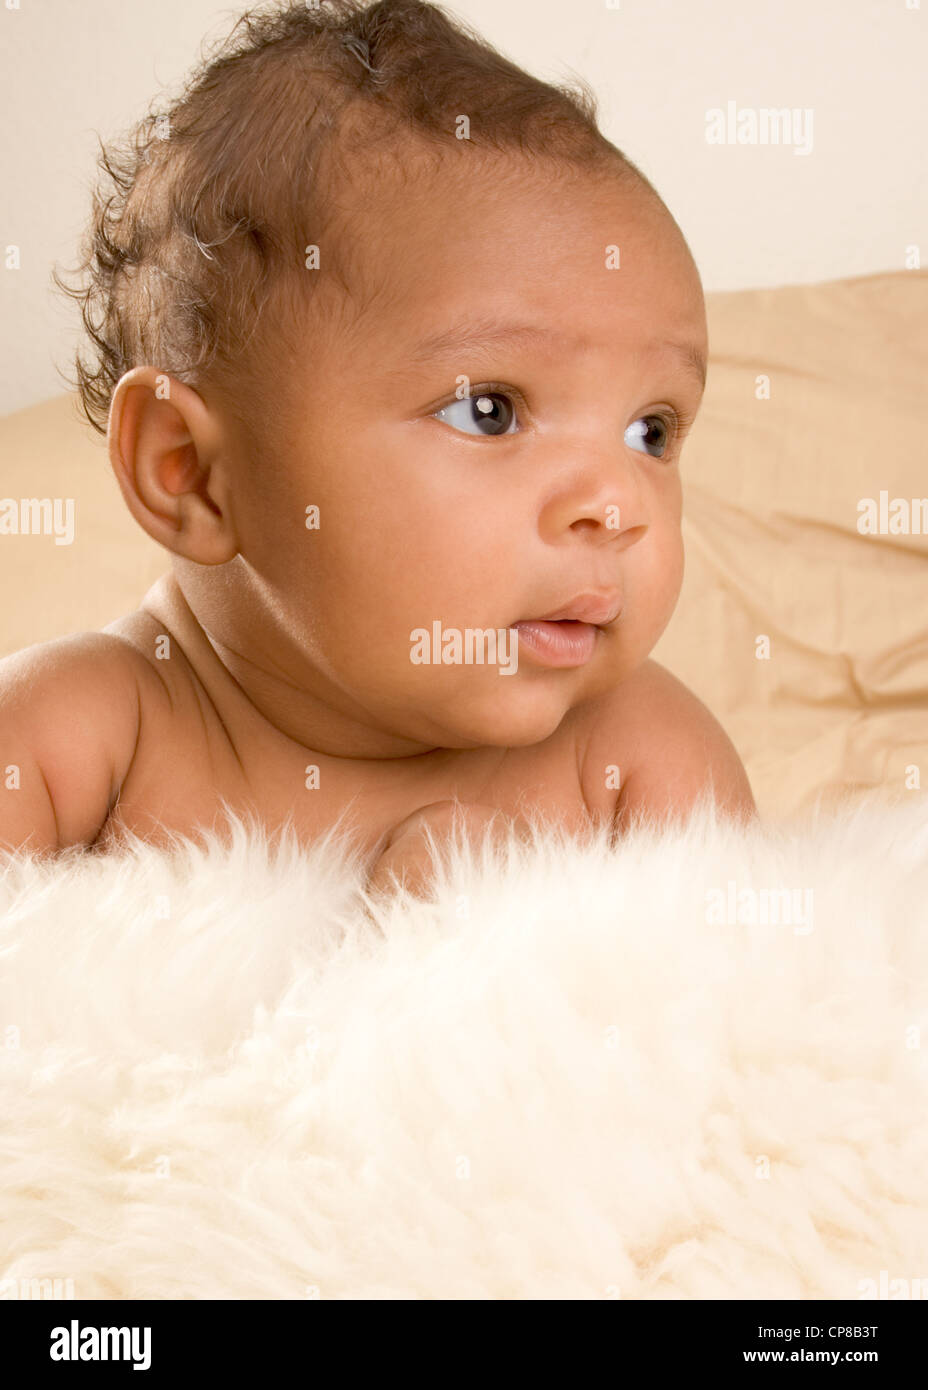 Thoughtful biracial mix of Hispanic and African American infant lying down on fur and yellowish colored blanket Stock Photo